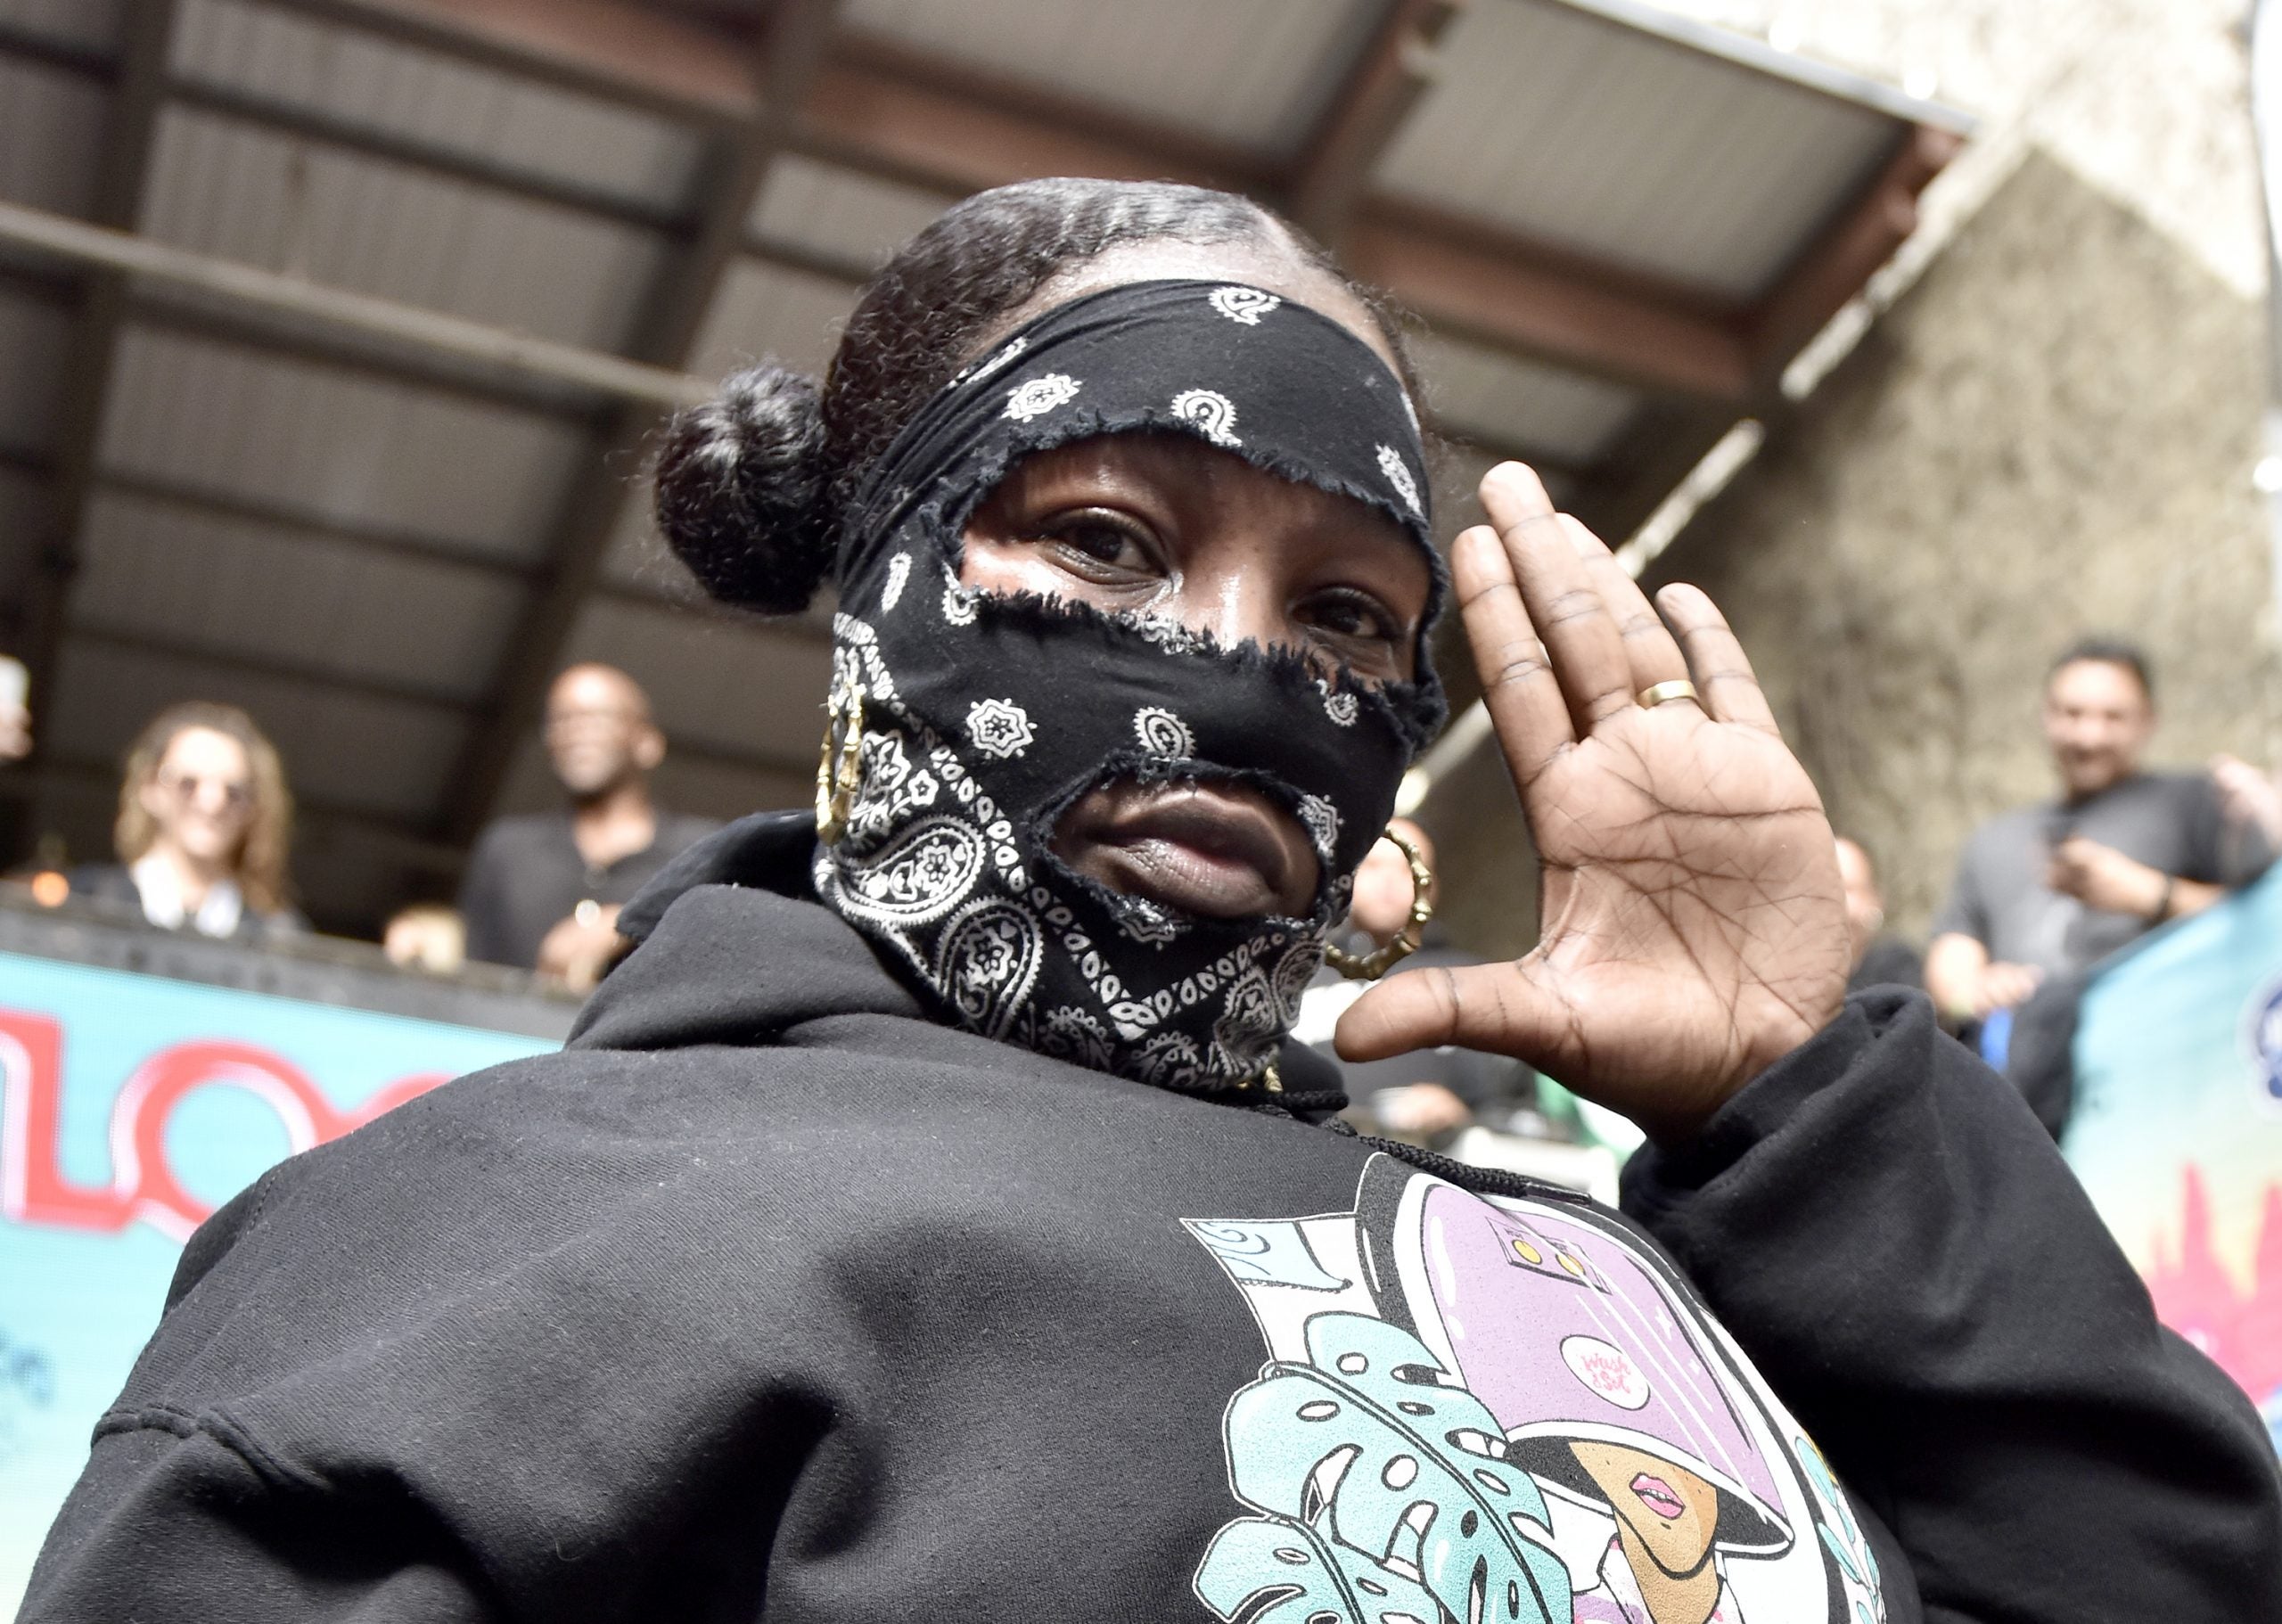 Leikeli47 Uplifts The Streets In This Week's Playlist